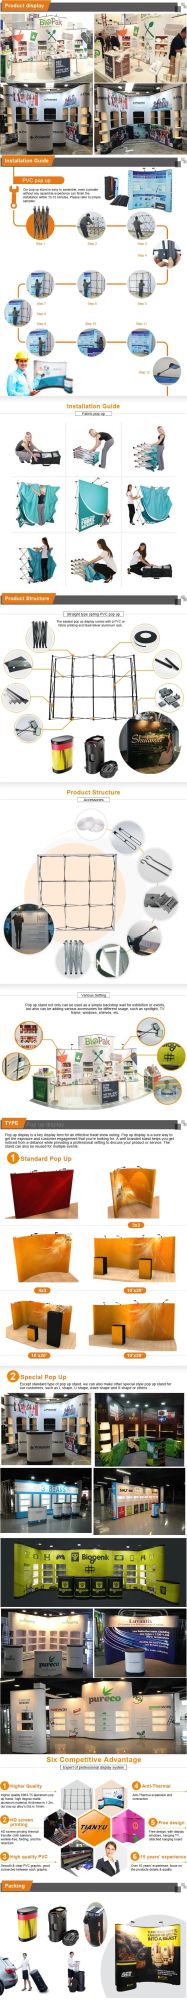 Heat Transfer Printing Tension Fabric Pop up Display Portable Backdrop Stand